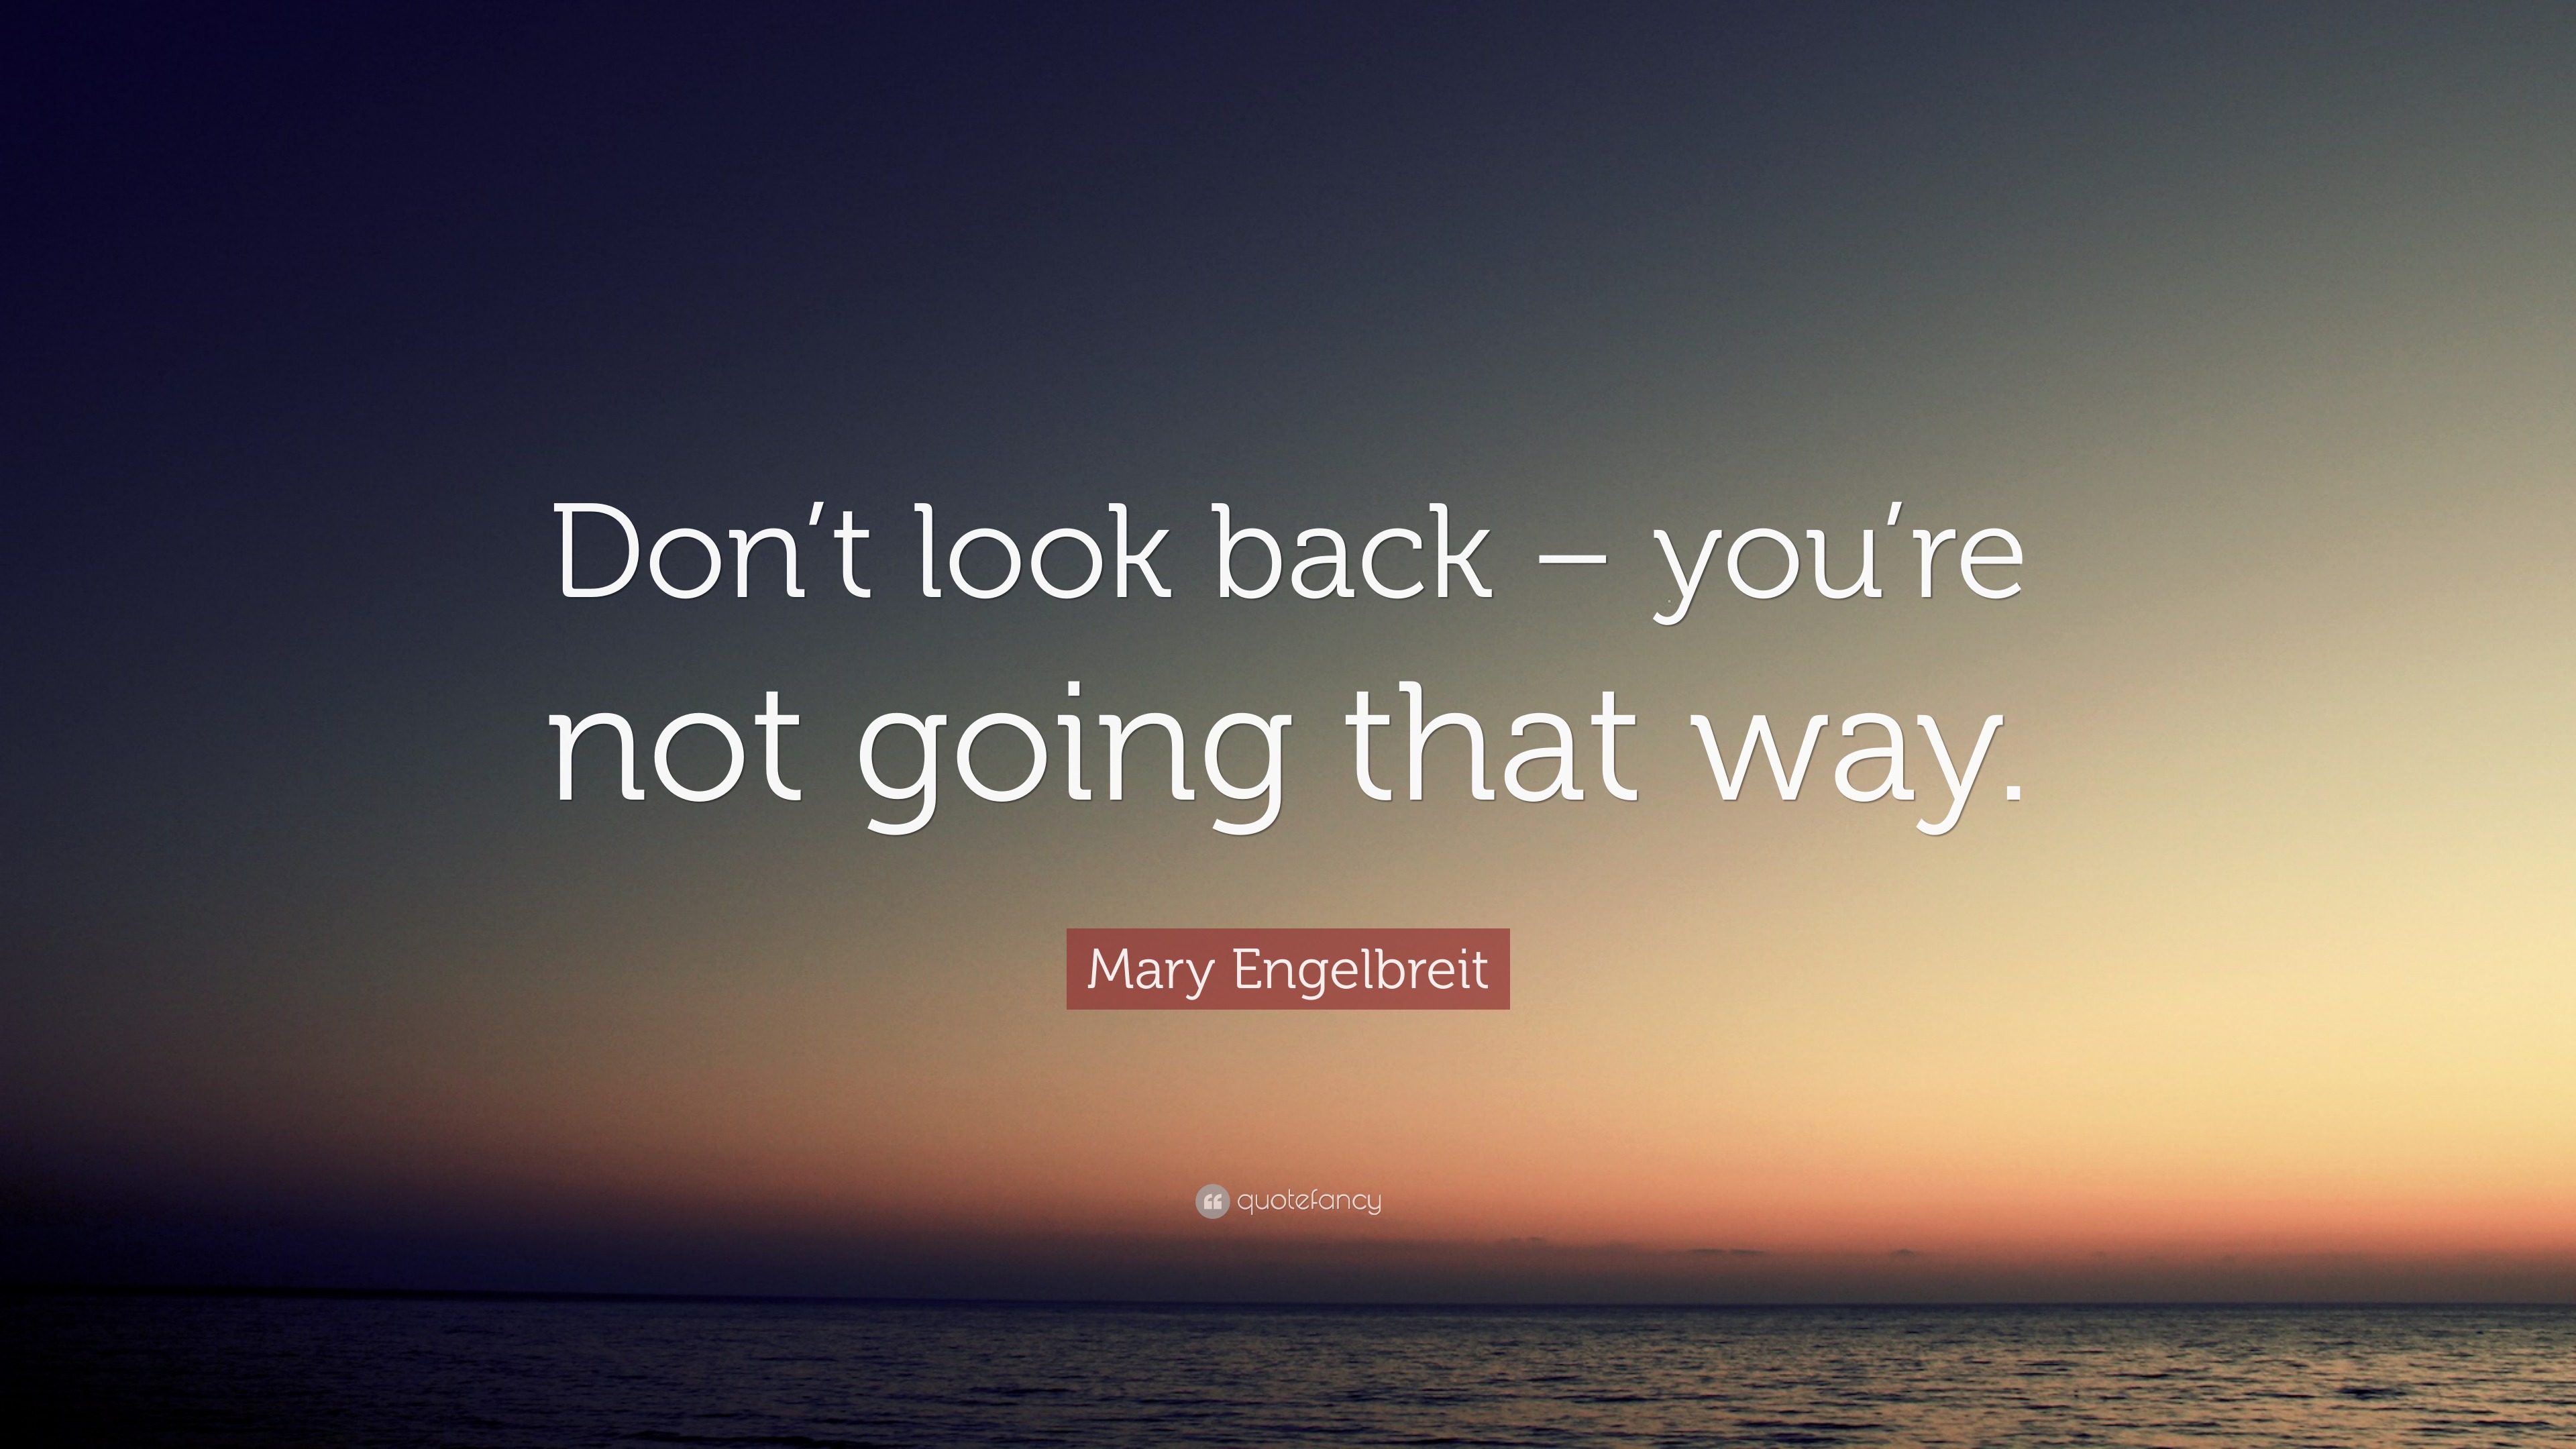 Mary Engelbreit Quote: “Don’t look back – you’re not going that way.”